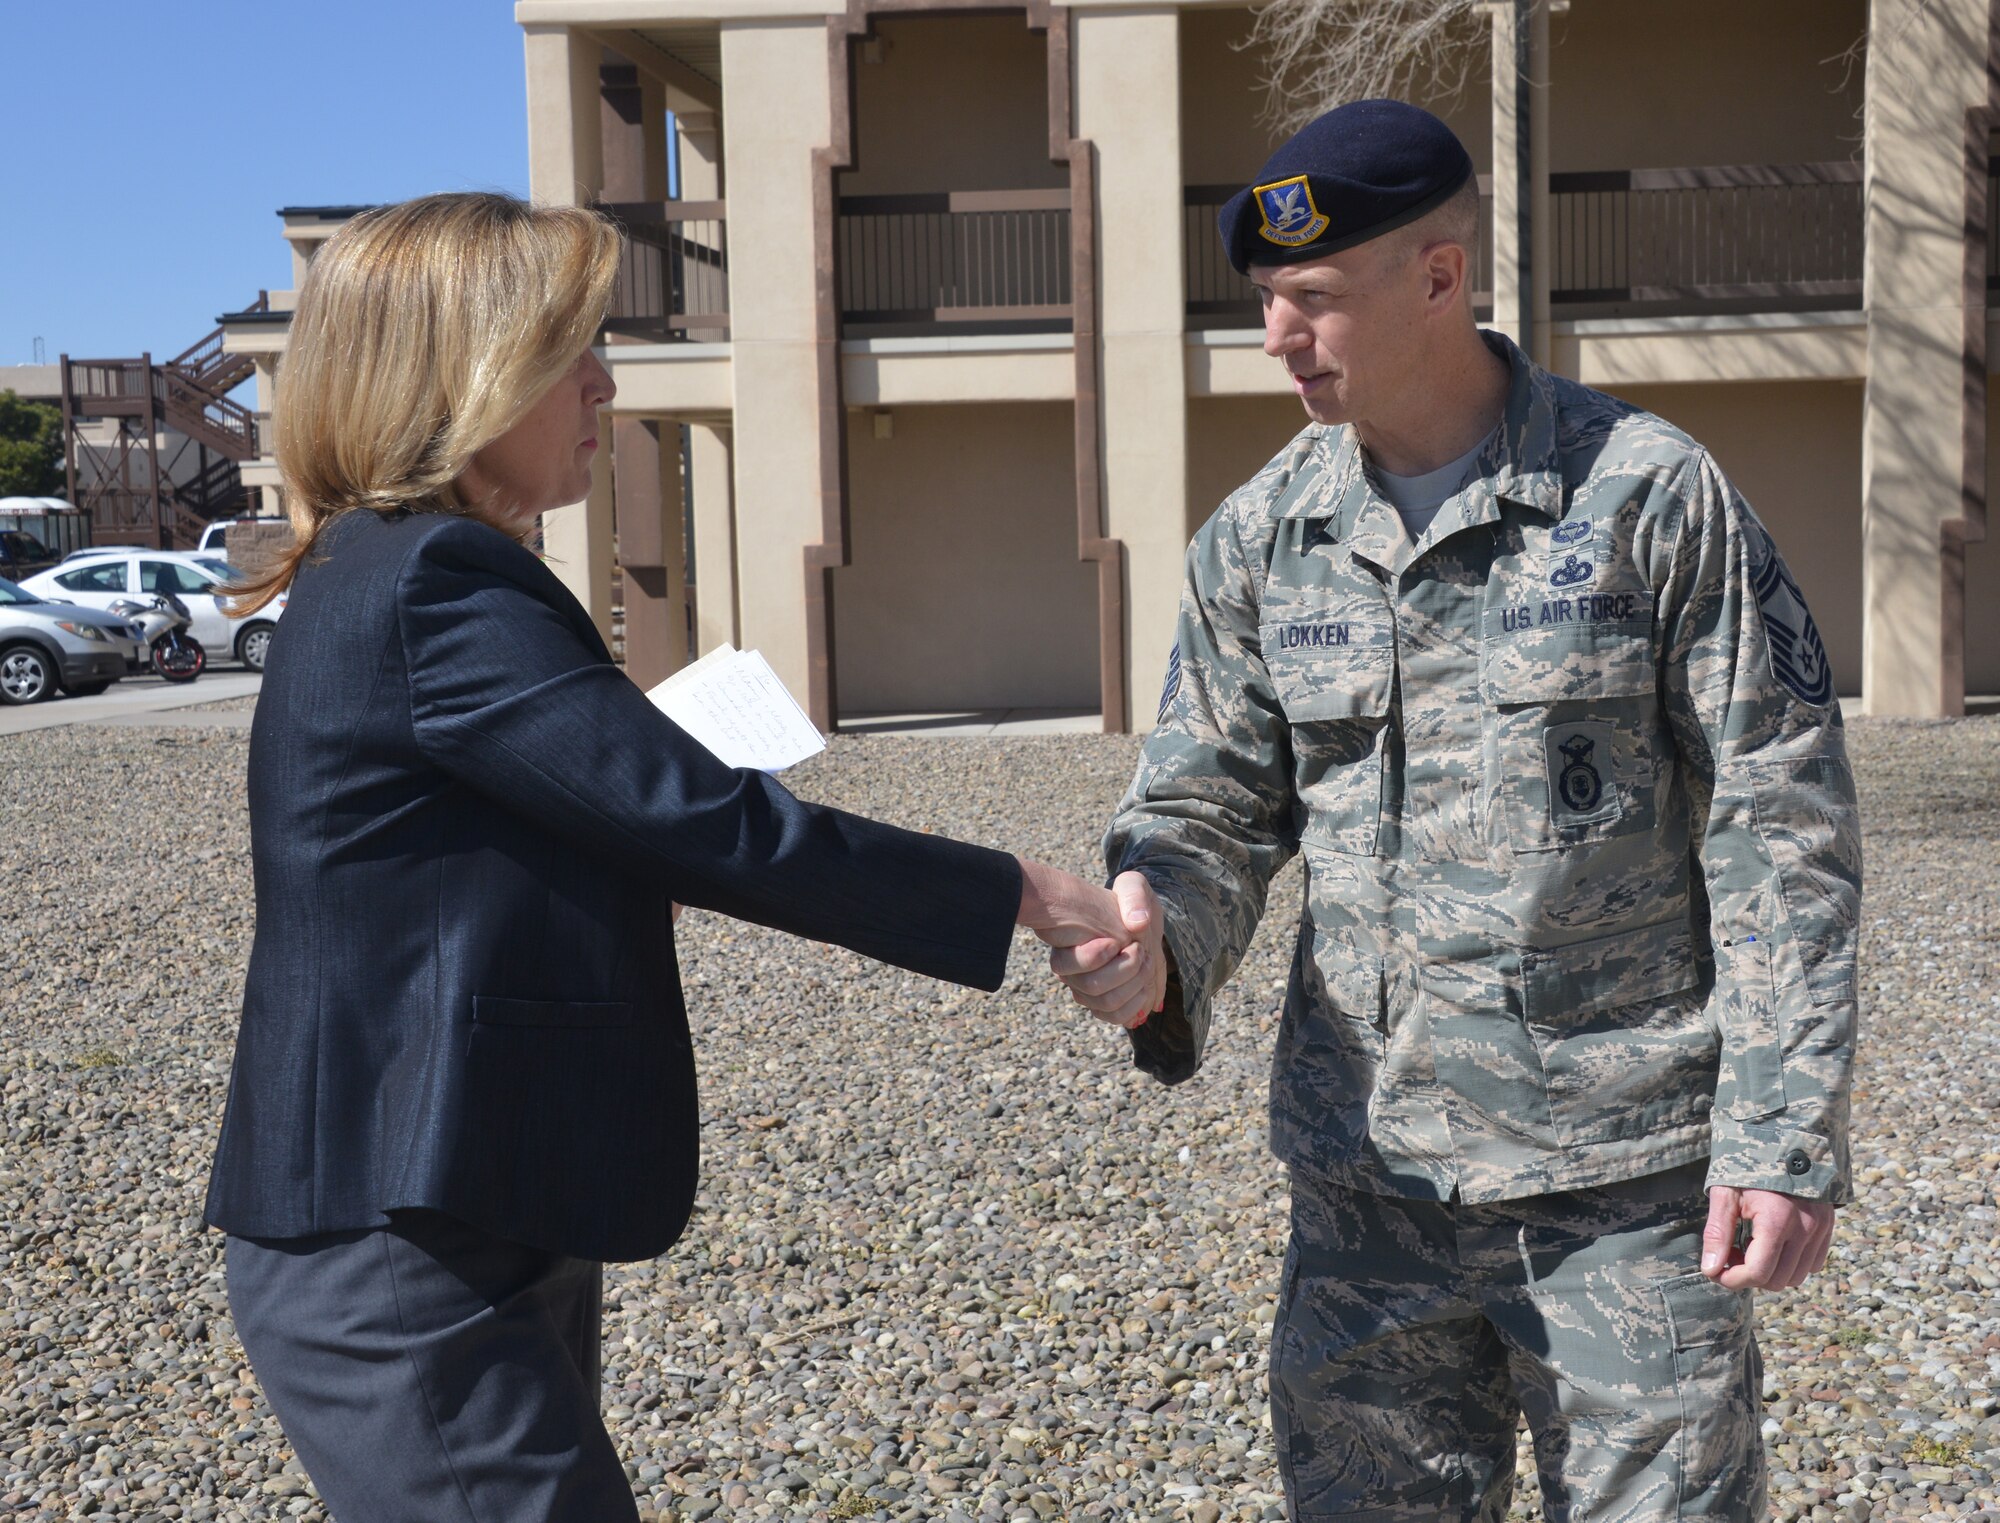 Secretary of the Air Force Deborah Lee James visits with Senior Airman William Rodriguez-Febrez during a lunch at March 11, 2015 at Kirtland Air Force Base, N.M. The luncheon was an opportunity for James to meet with Airmen from across Kirtland to discuss issues important to them. Rodriguez-Febrez is assigned to the 58th Operations Support Squadron. (Courtesty photo/Dennis Carlson)